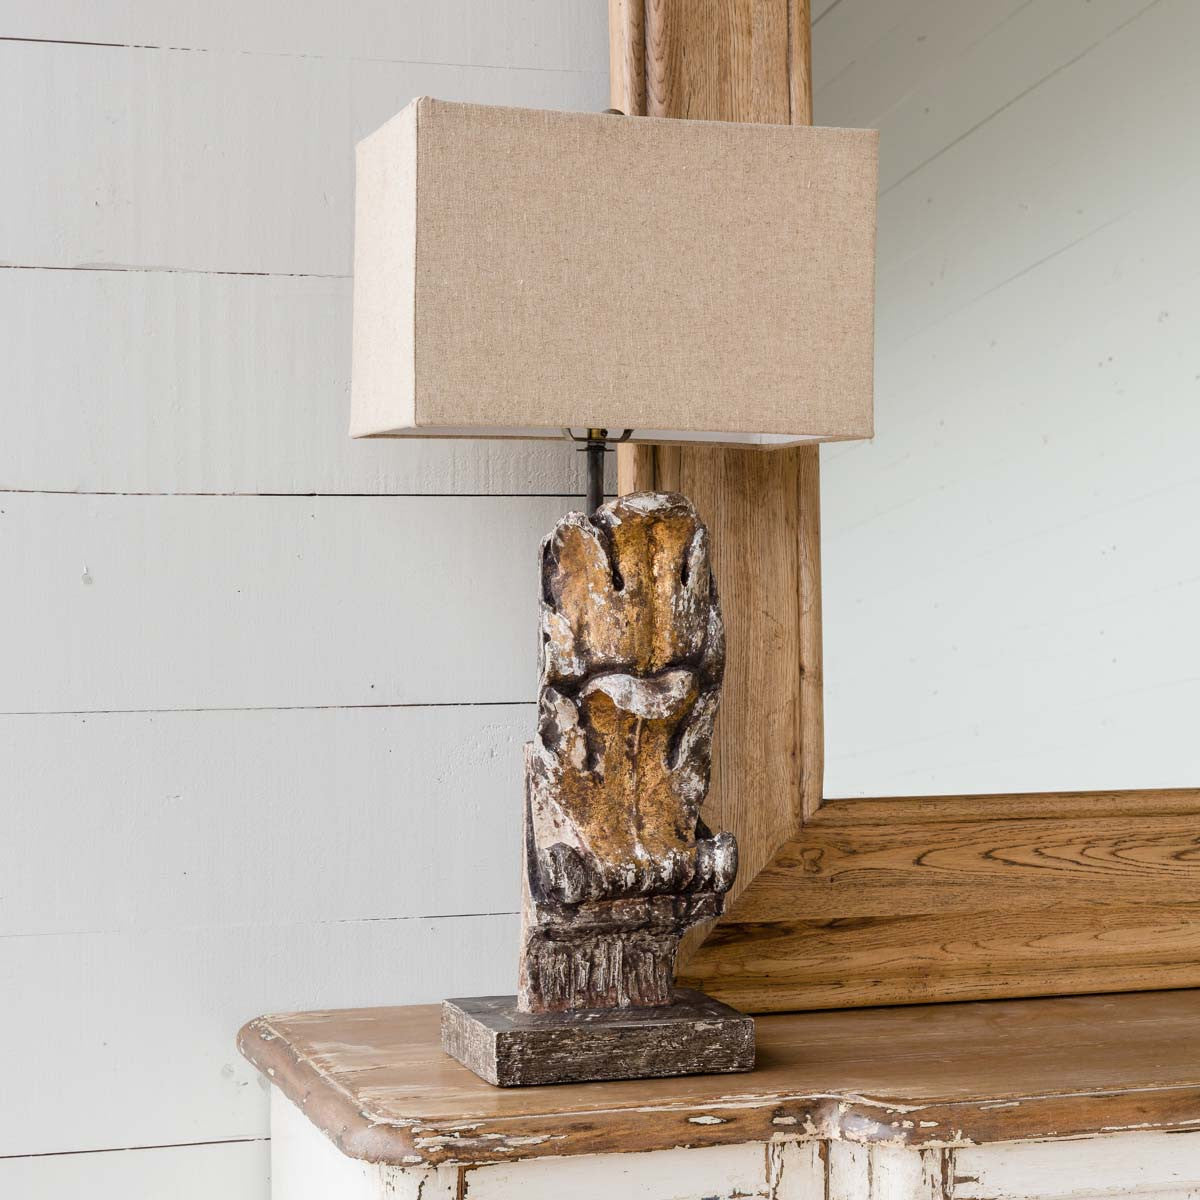 Architectural Relic Lamp-Iron Accents